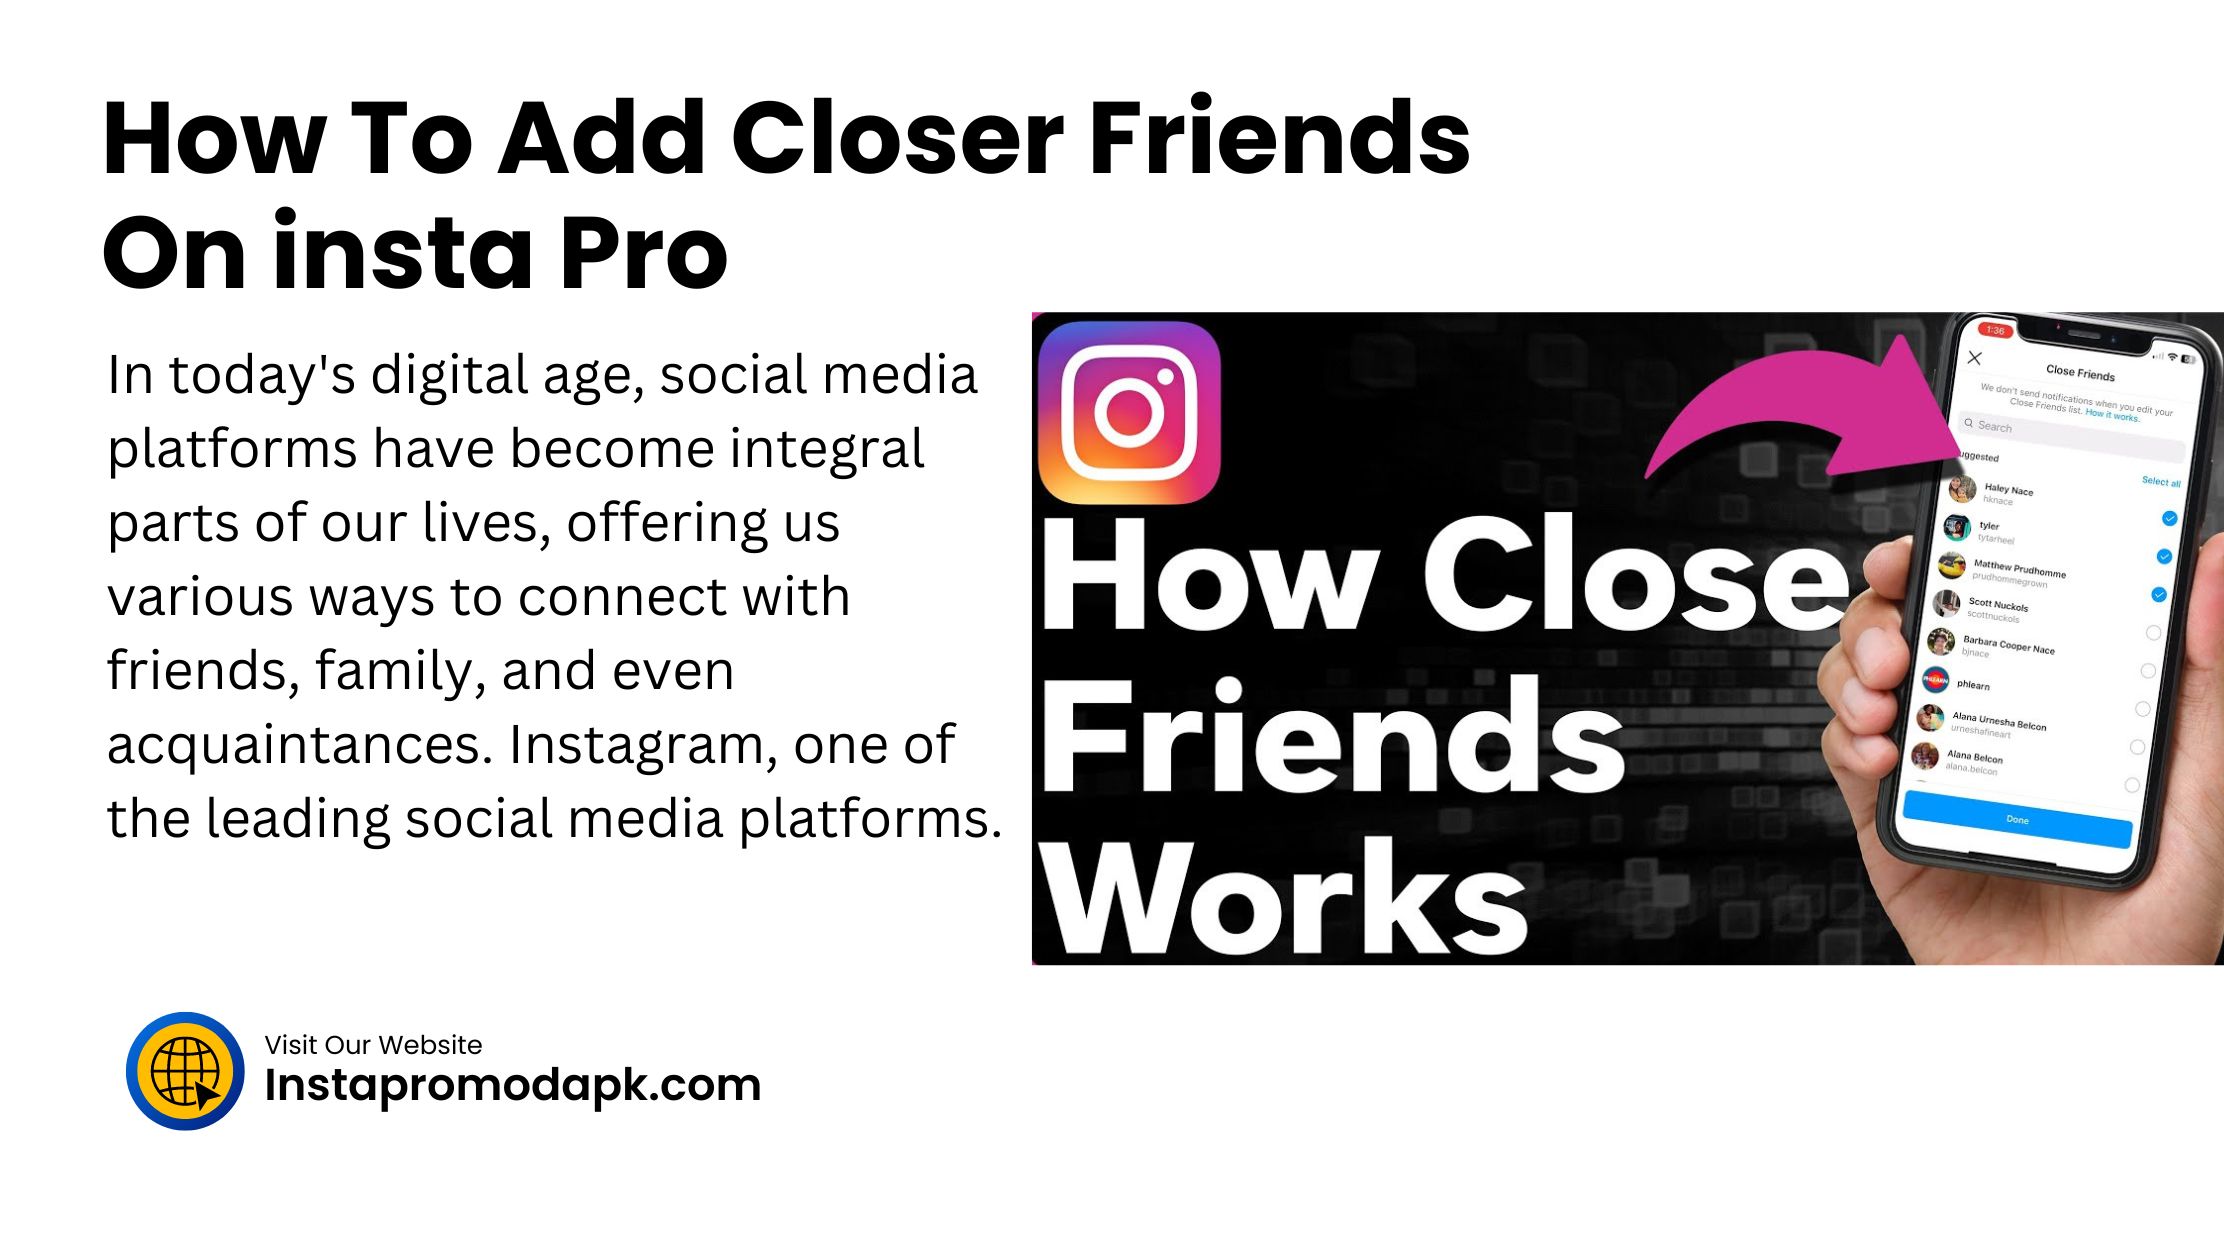 How To Add Closer Friends On insta Pro